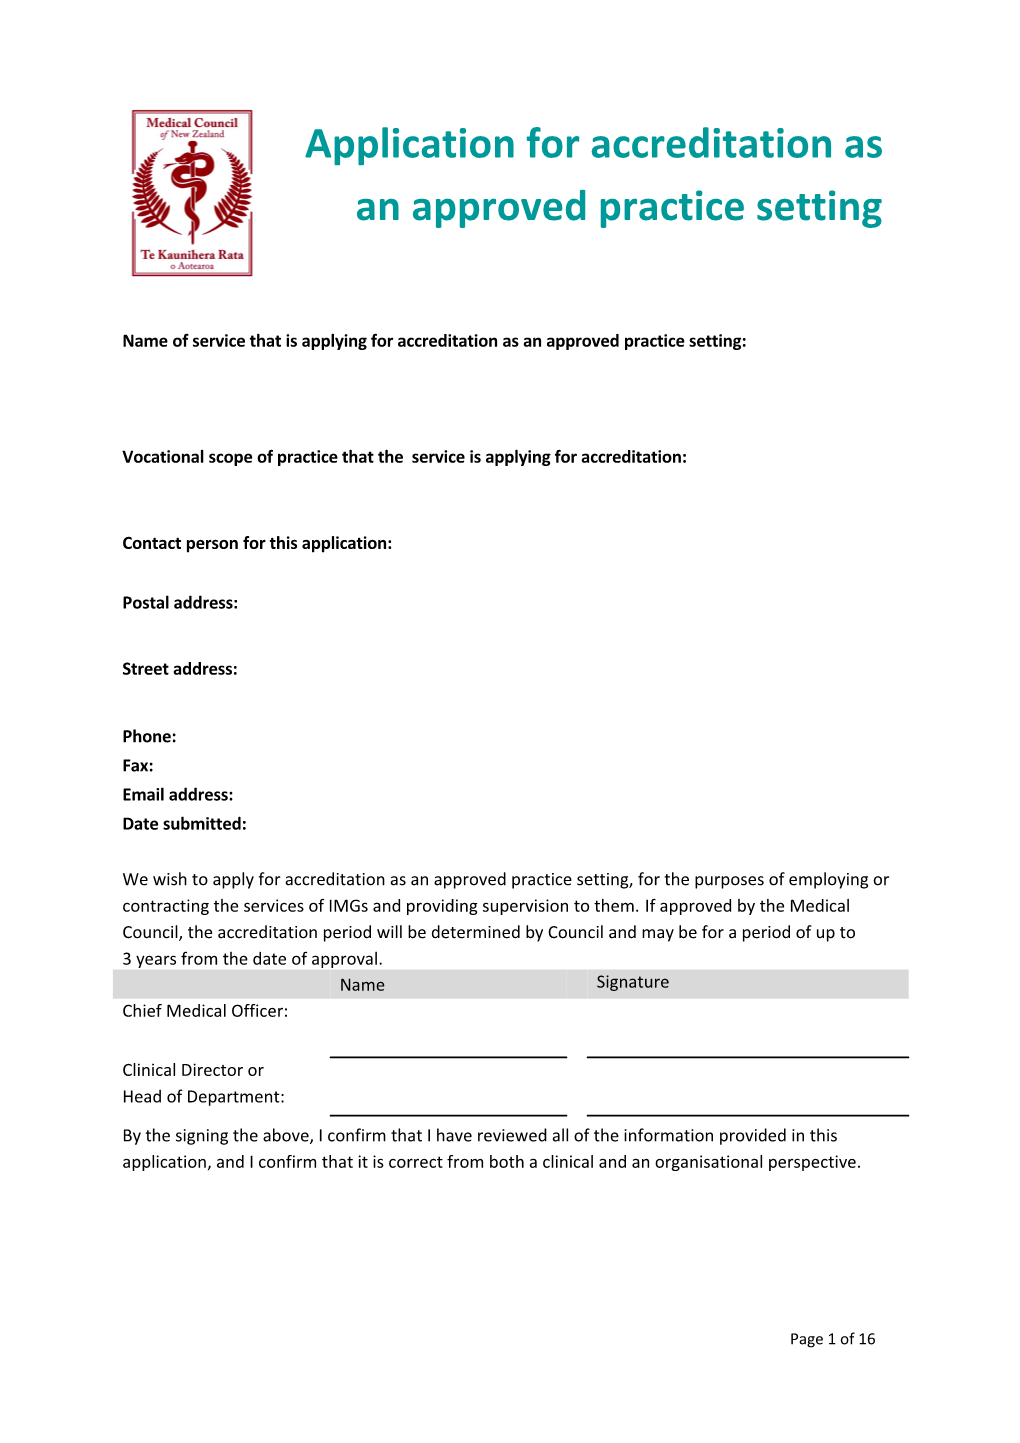 Assessment Checklist for Accreditation of an Approved Practice Setting